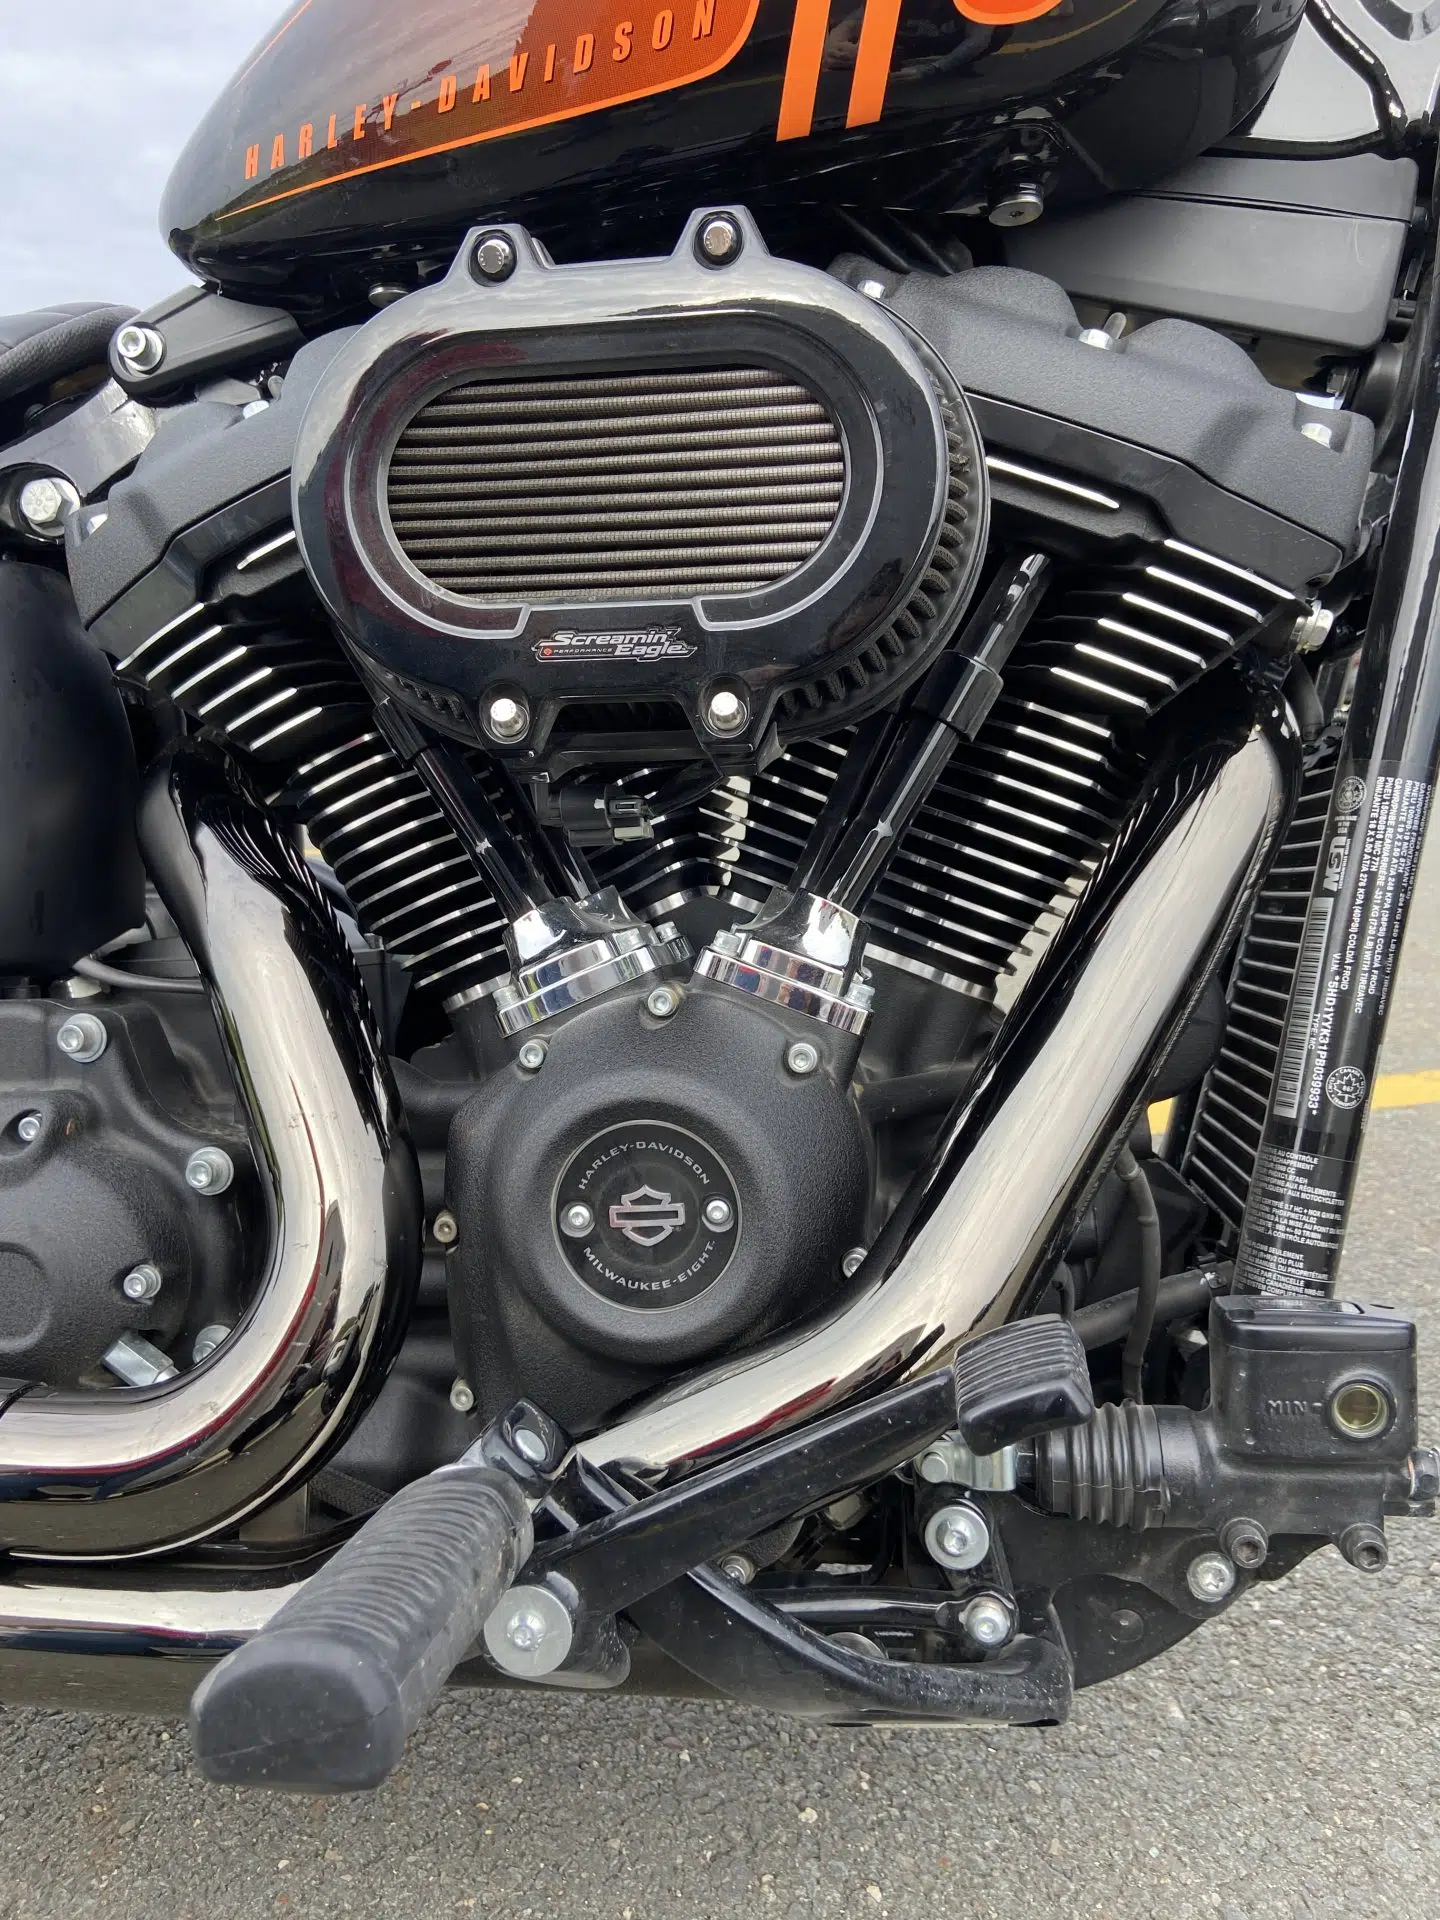 The Milwaukee-Eight 114 engine gives all its power to the motorcycle